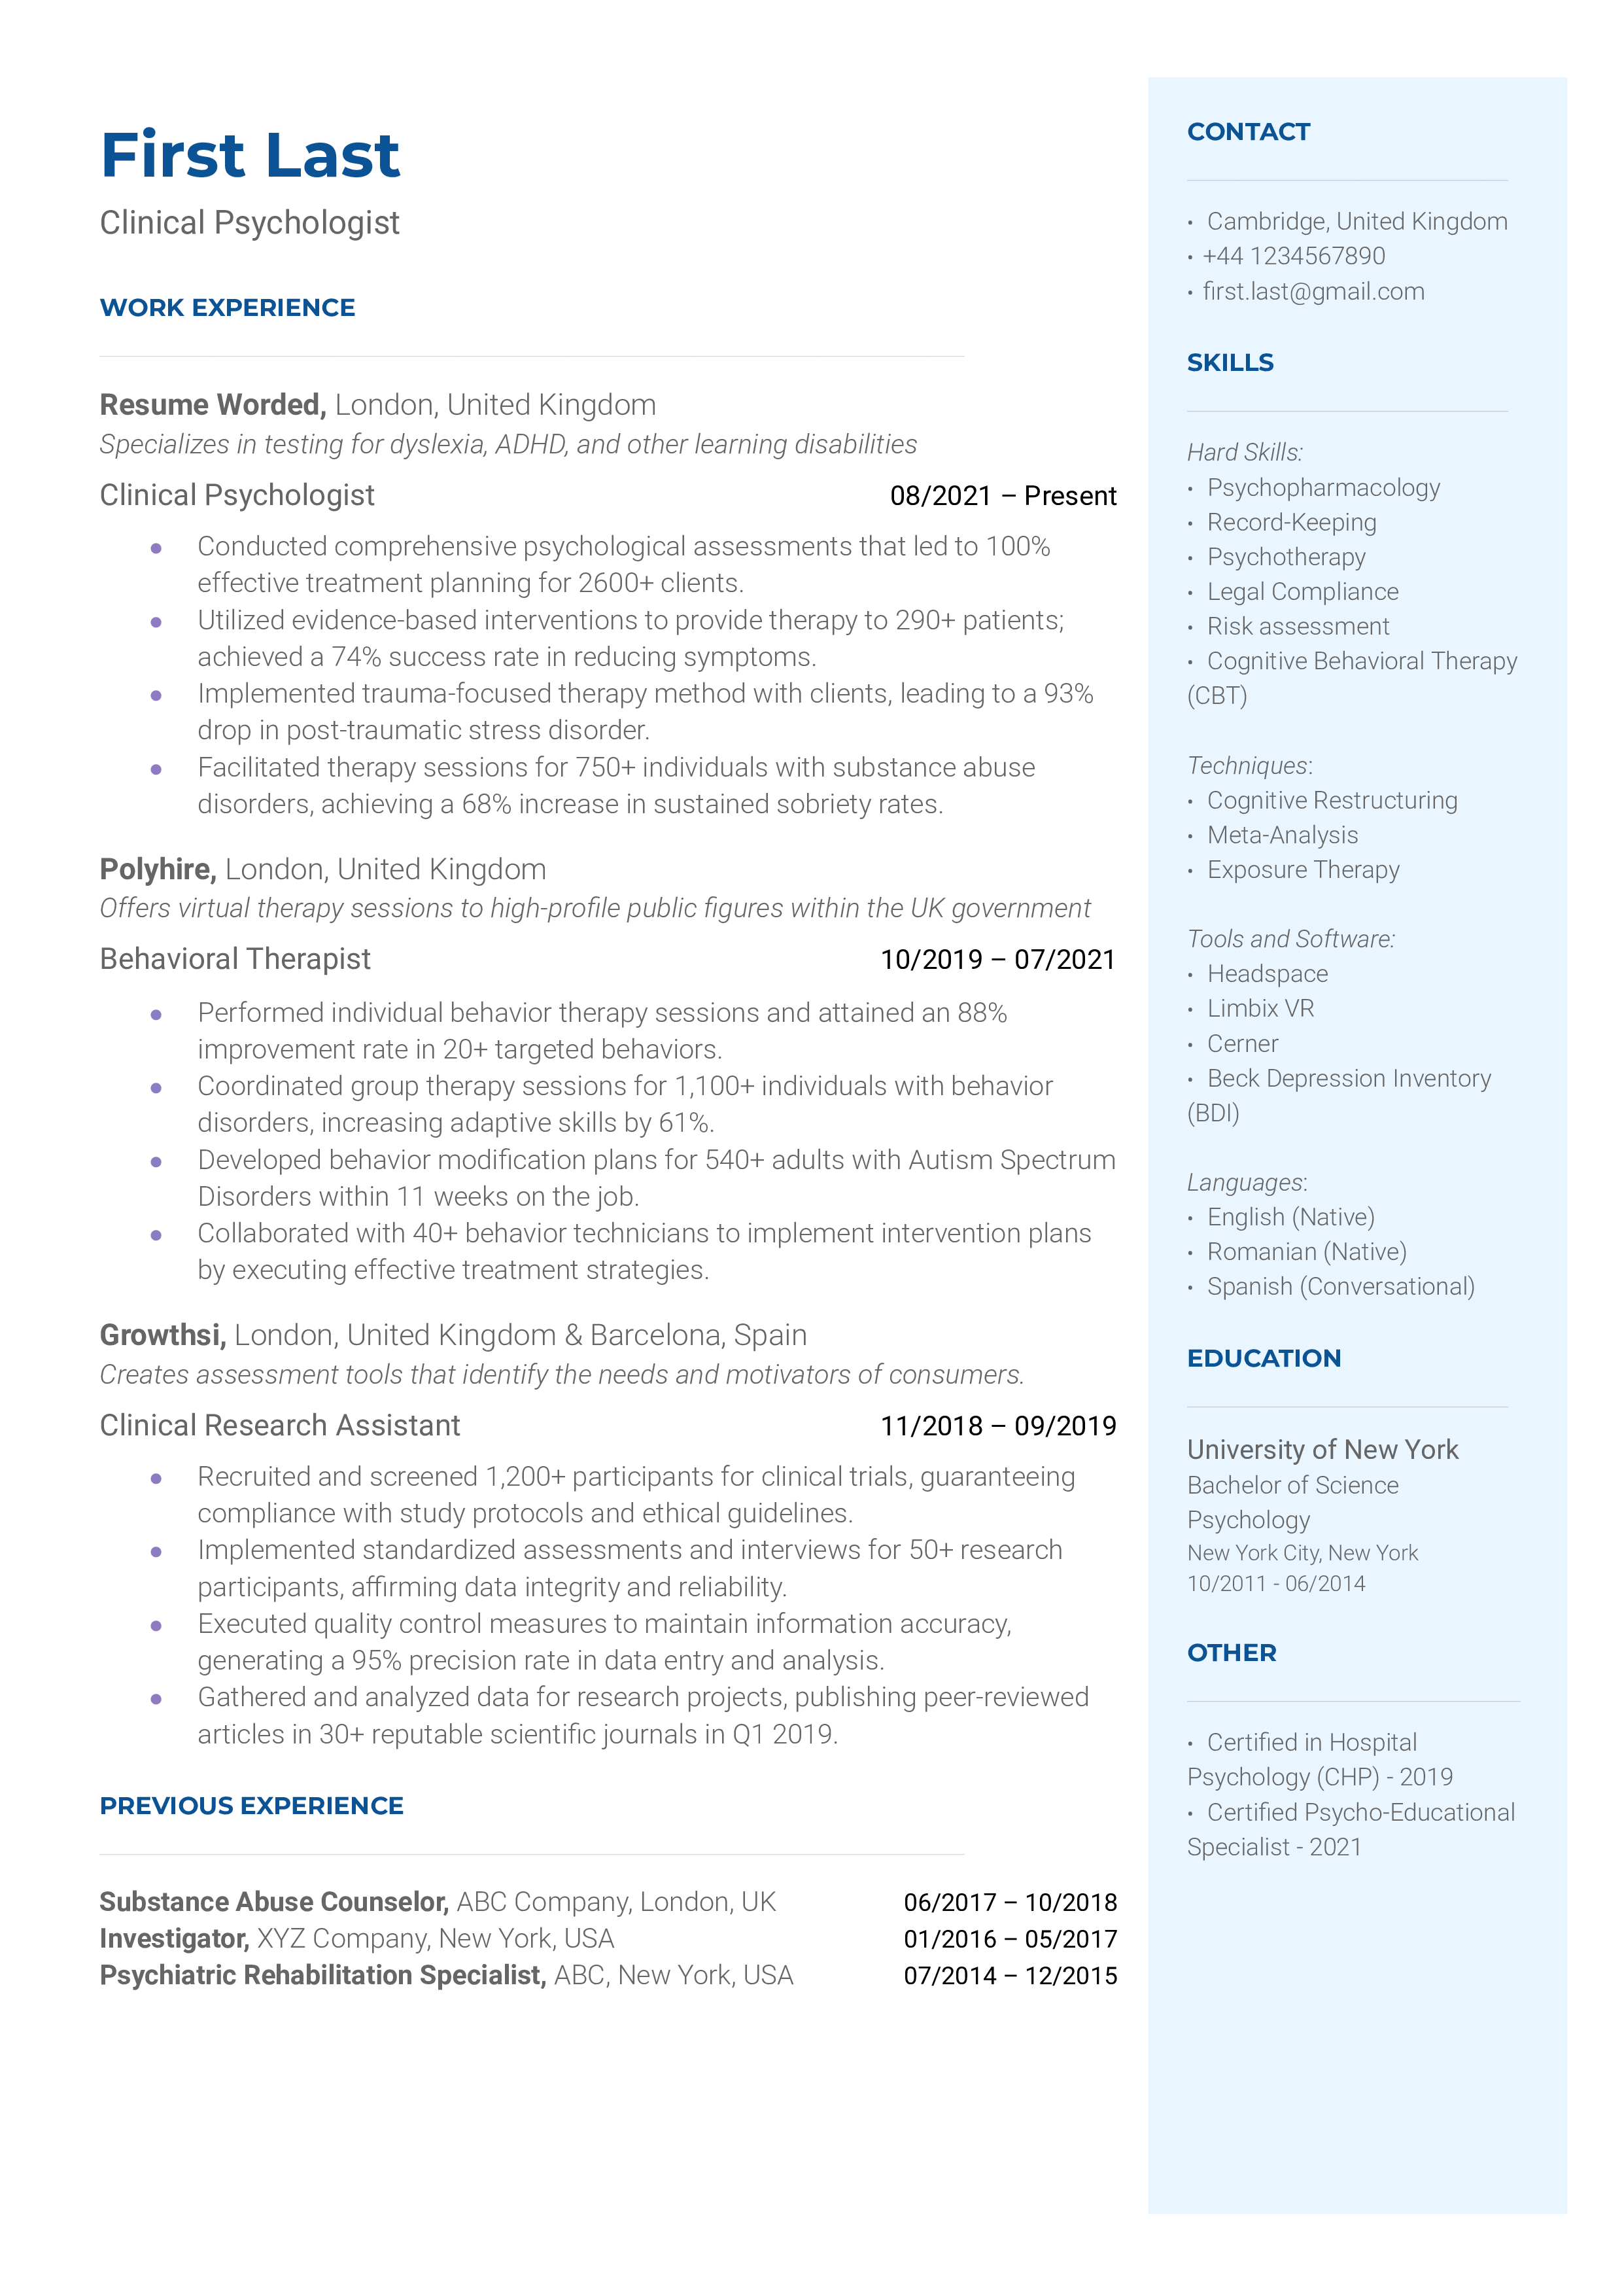 A well-detailed resume showcasing the qualifications and experience of a clinical psychologist.